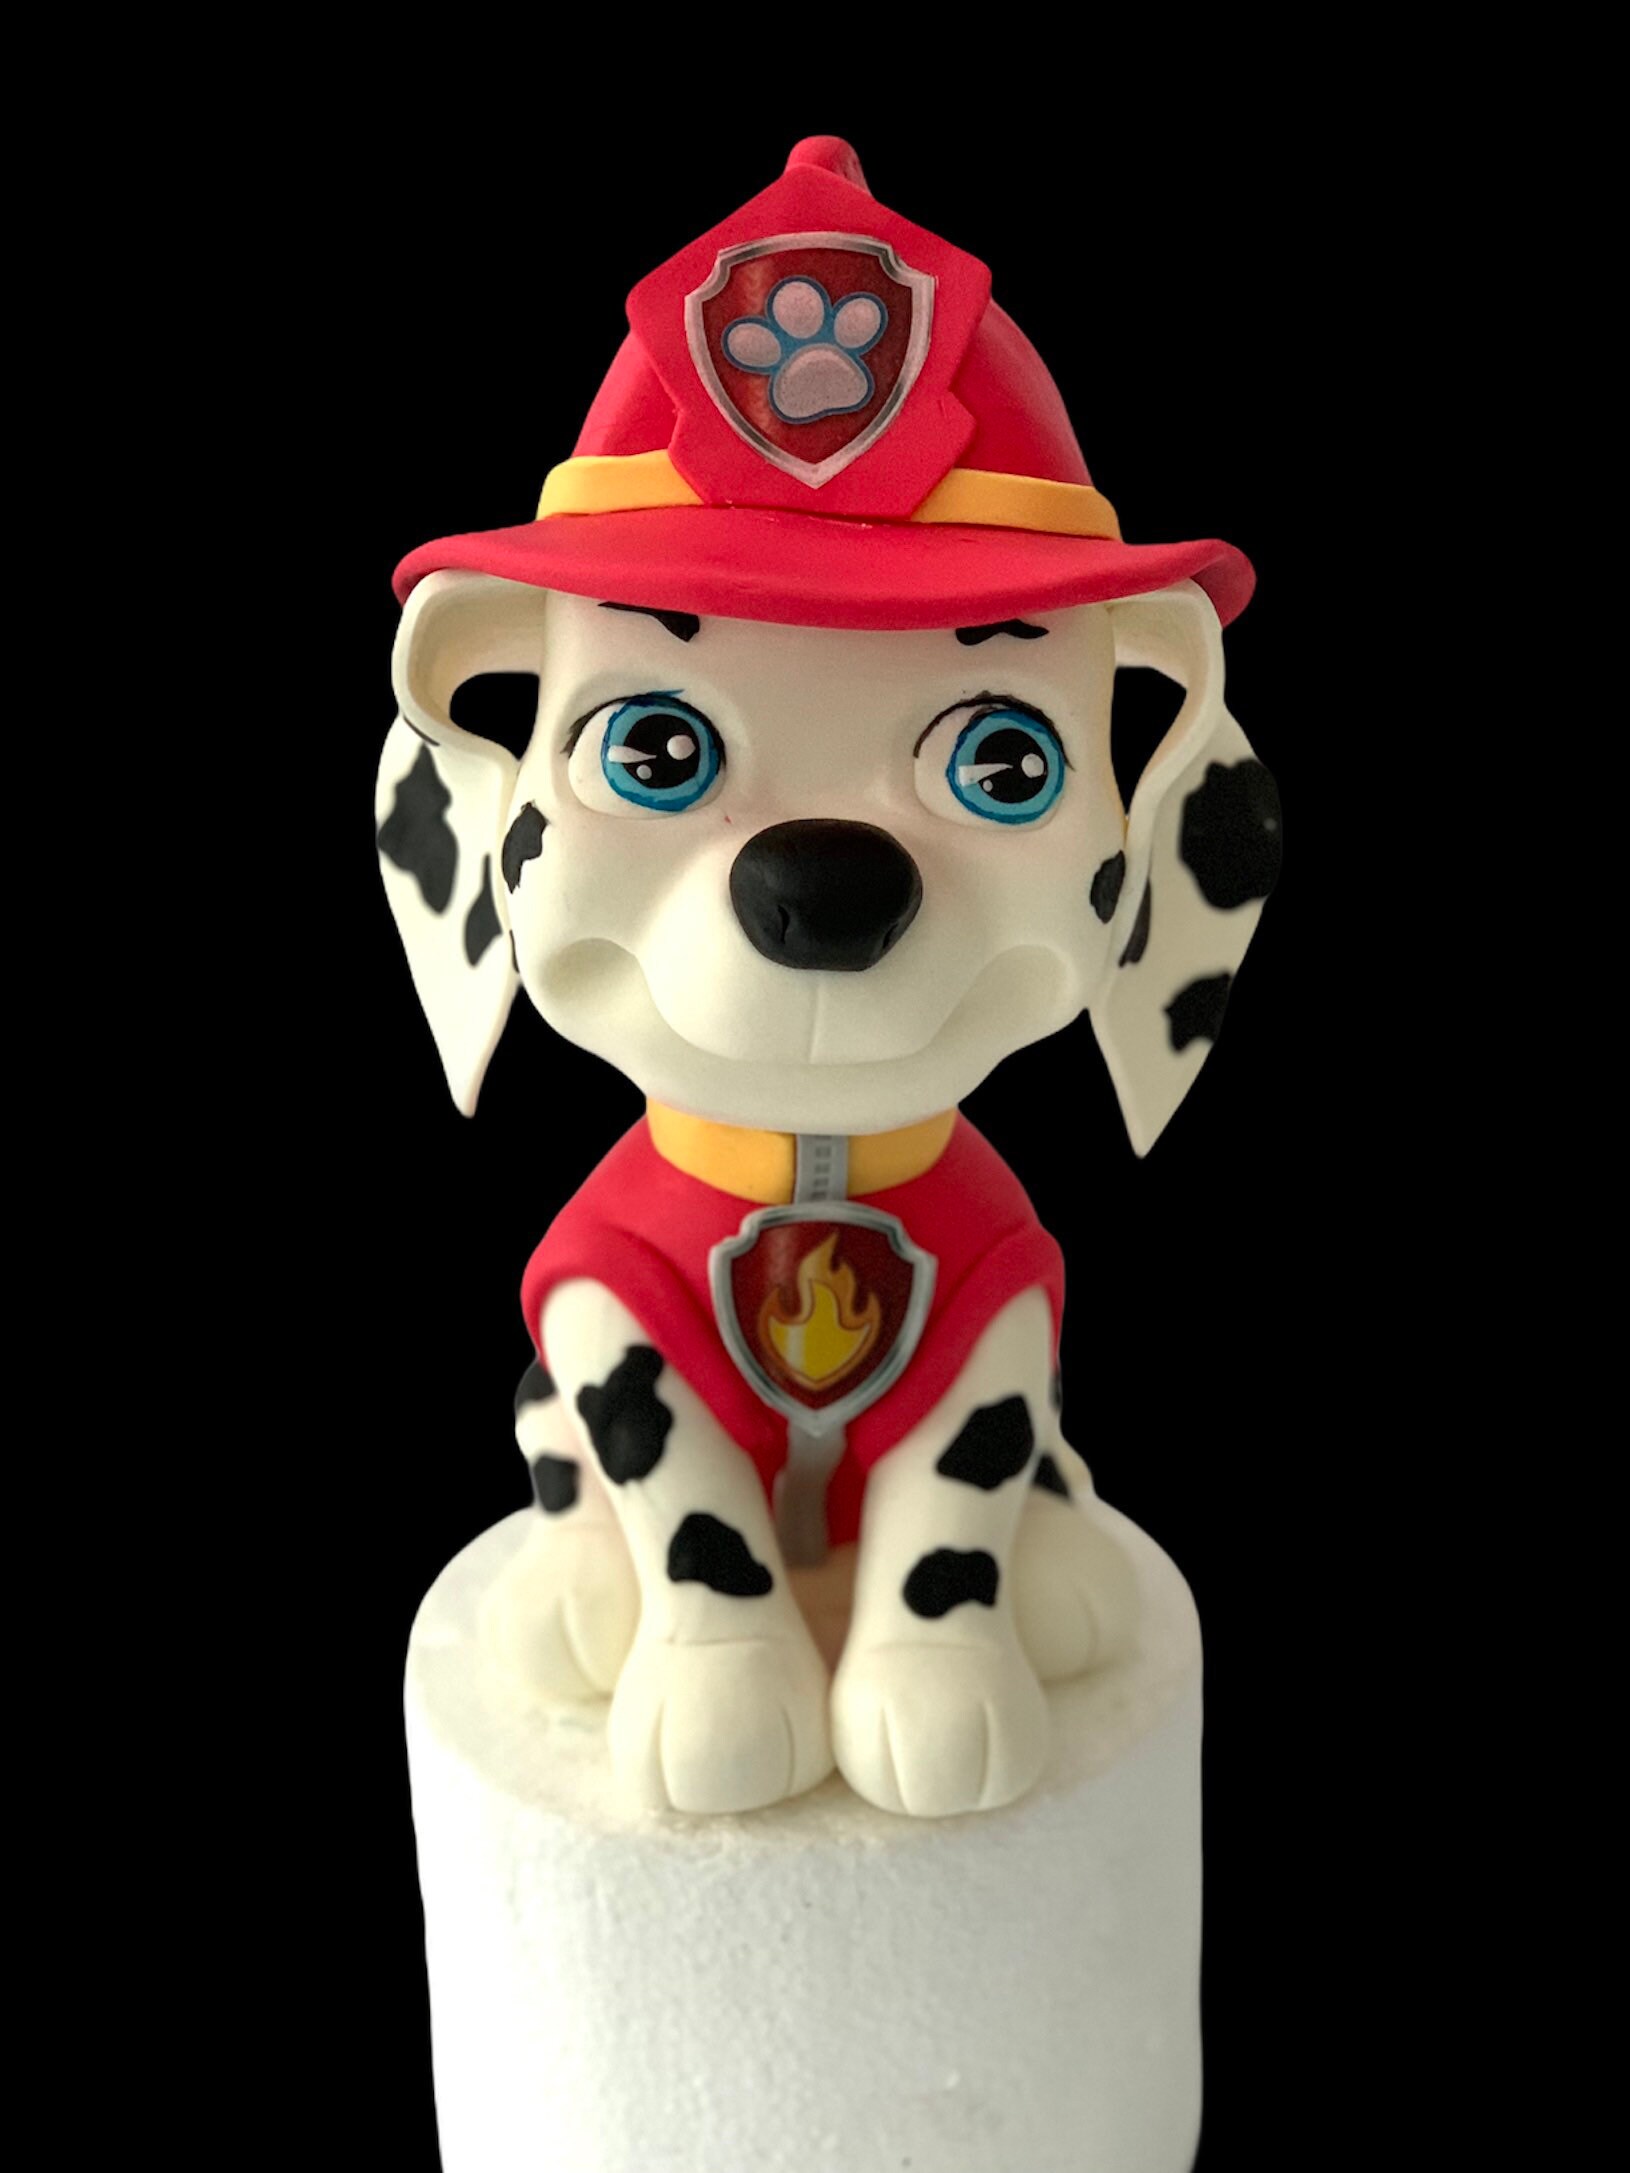 Unofficial Paw Patrol Marshall Cake Topper